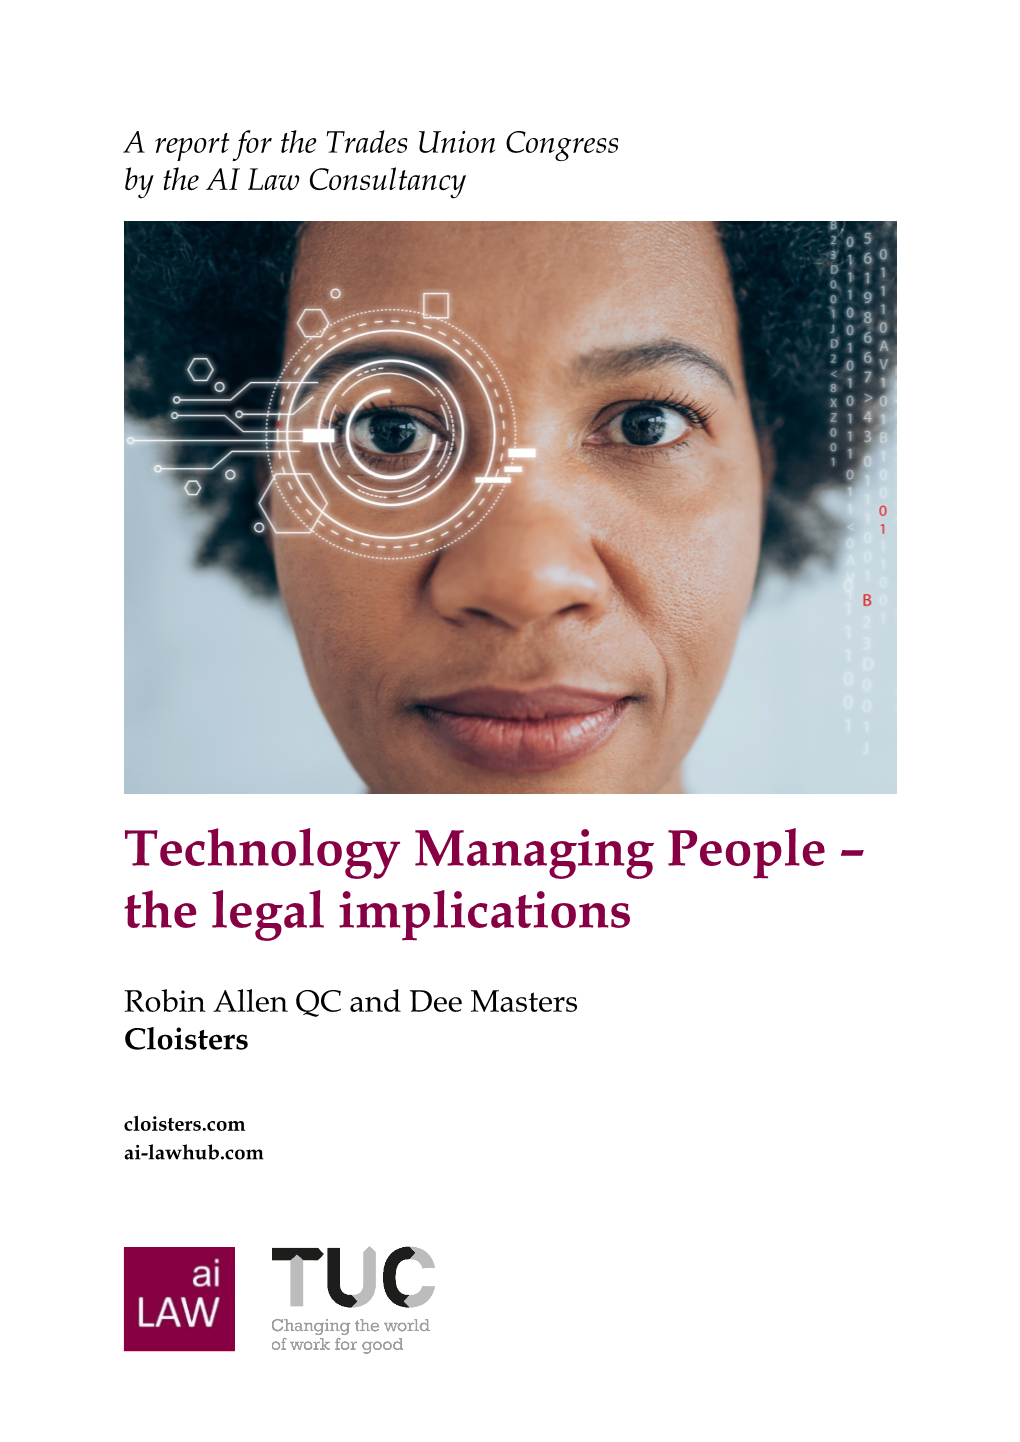 Technology Managing People – the Legal Implications